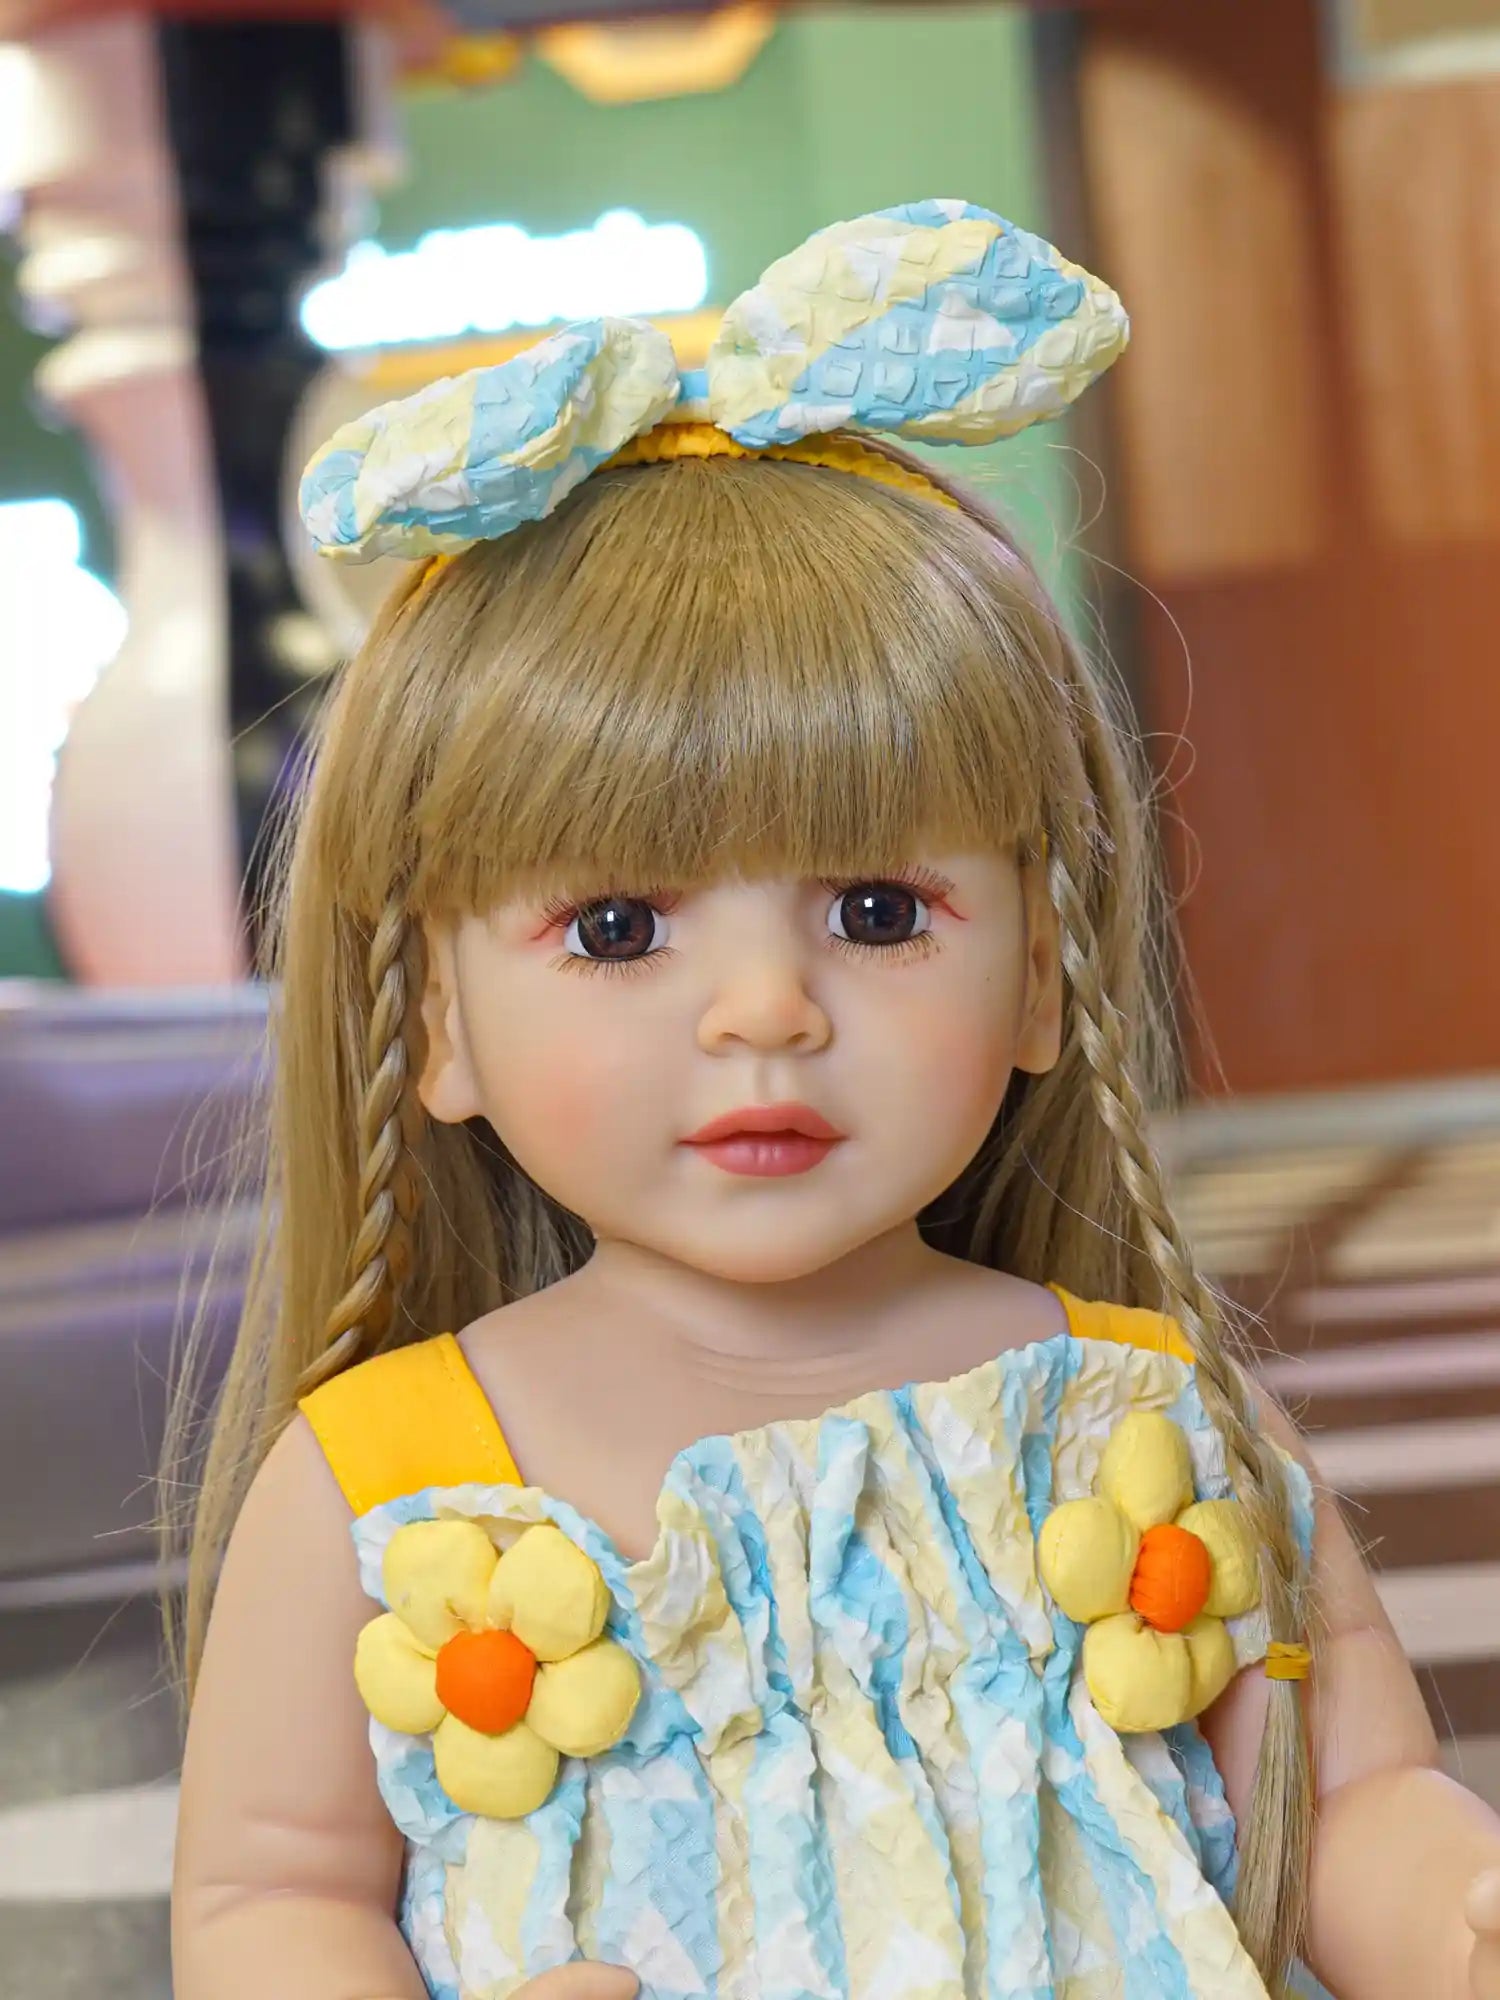 Realistic doll with yellow headband and braids, in a playful dress.